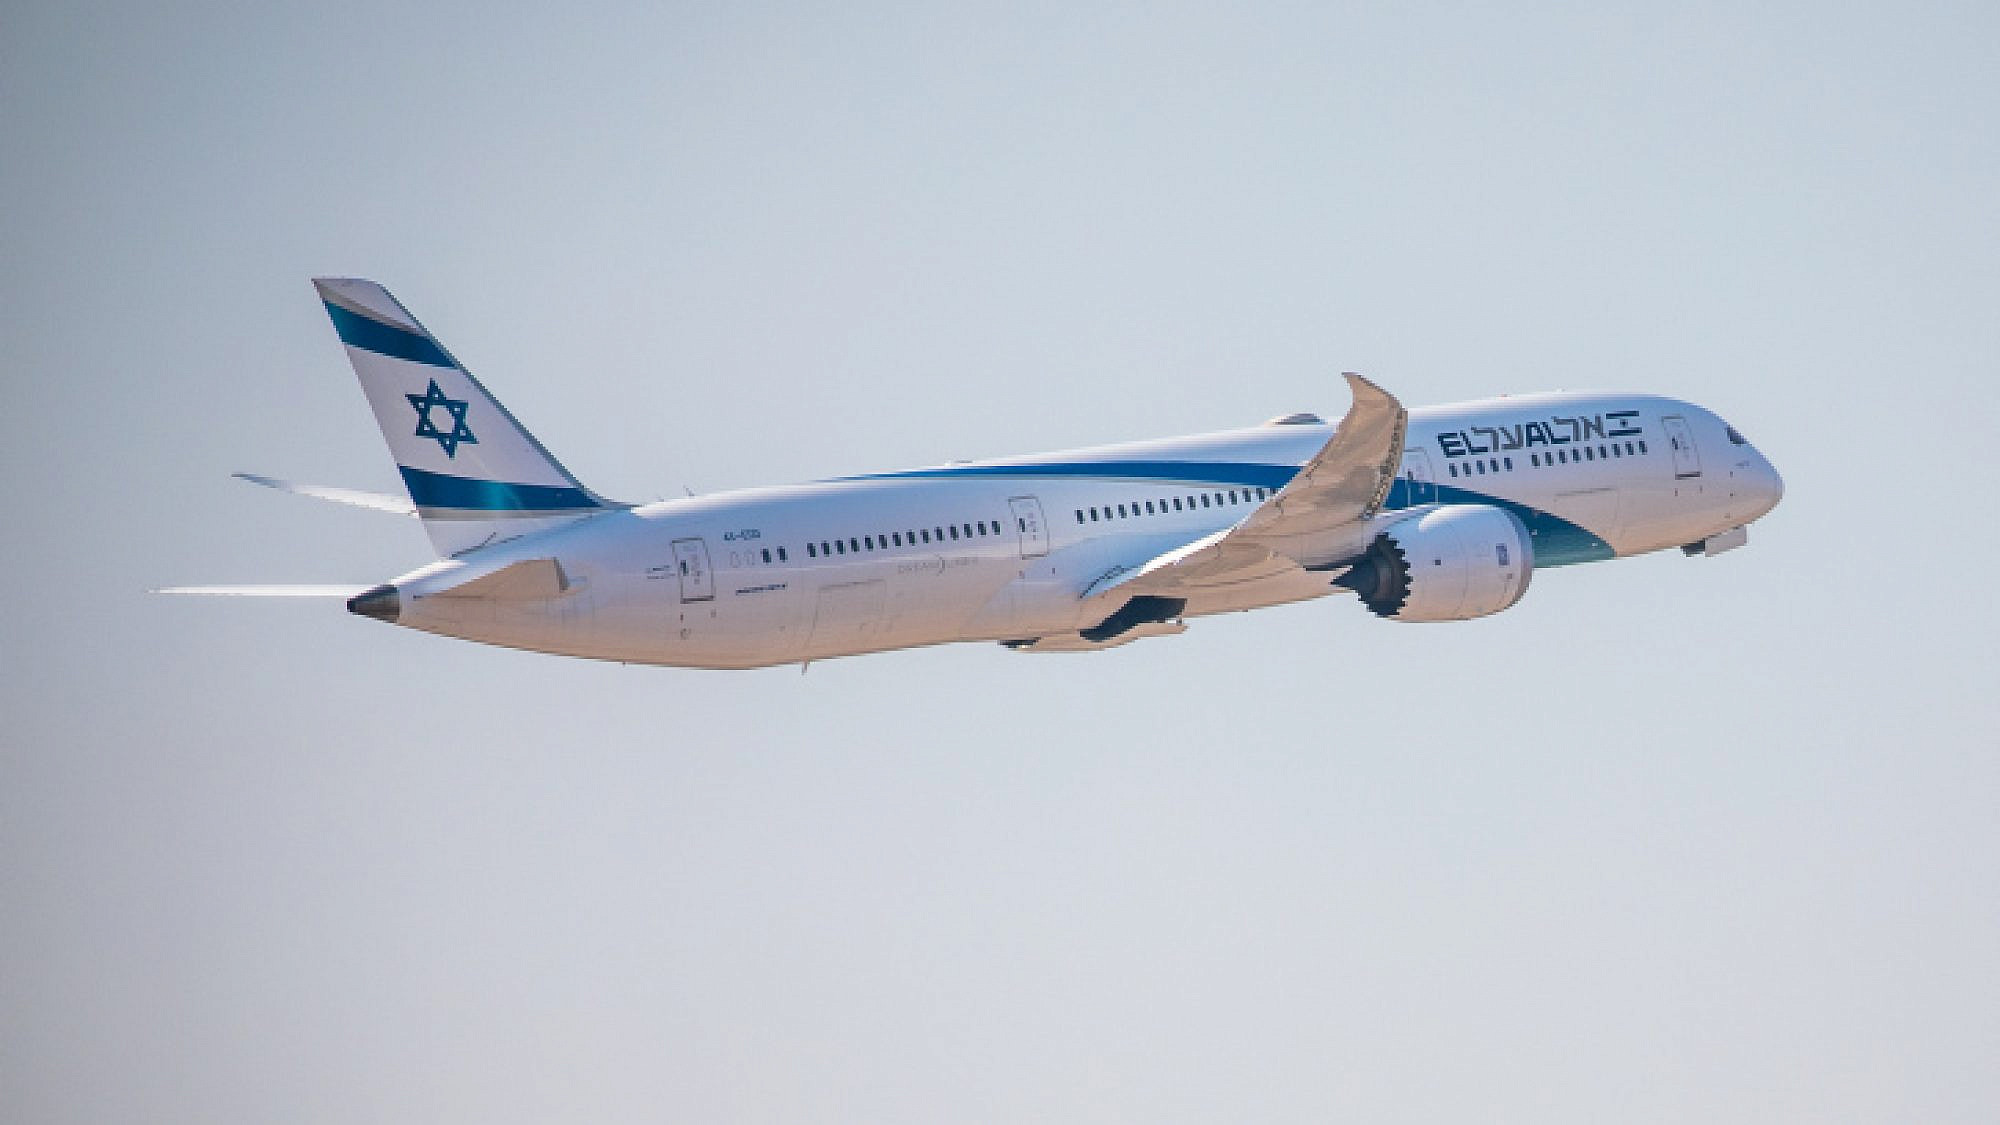 An El AL flight takes off at Ben Gurion International Airport, Oct. 25, 2021. Photo by Yossi Aloni/Flash90.